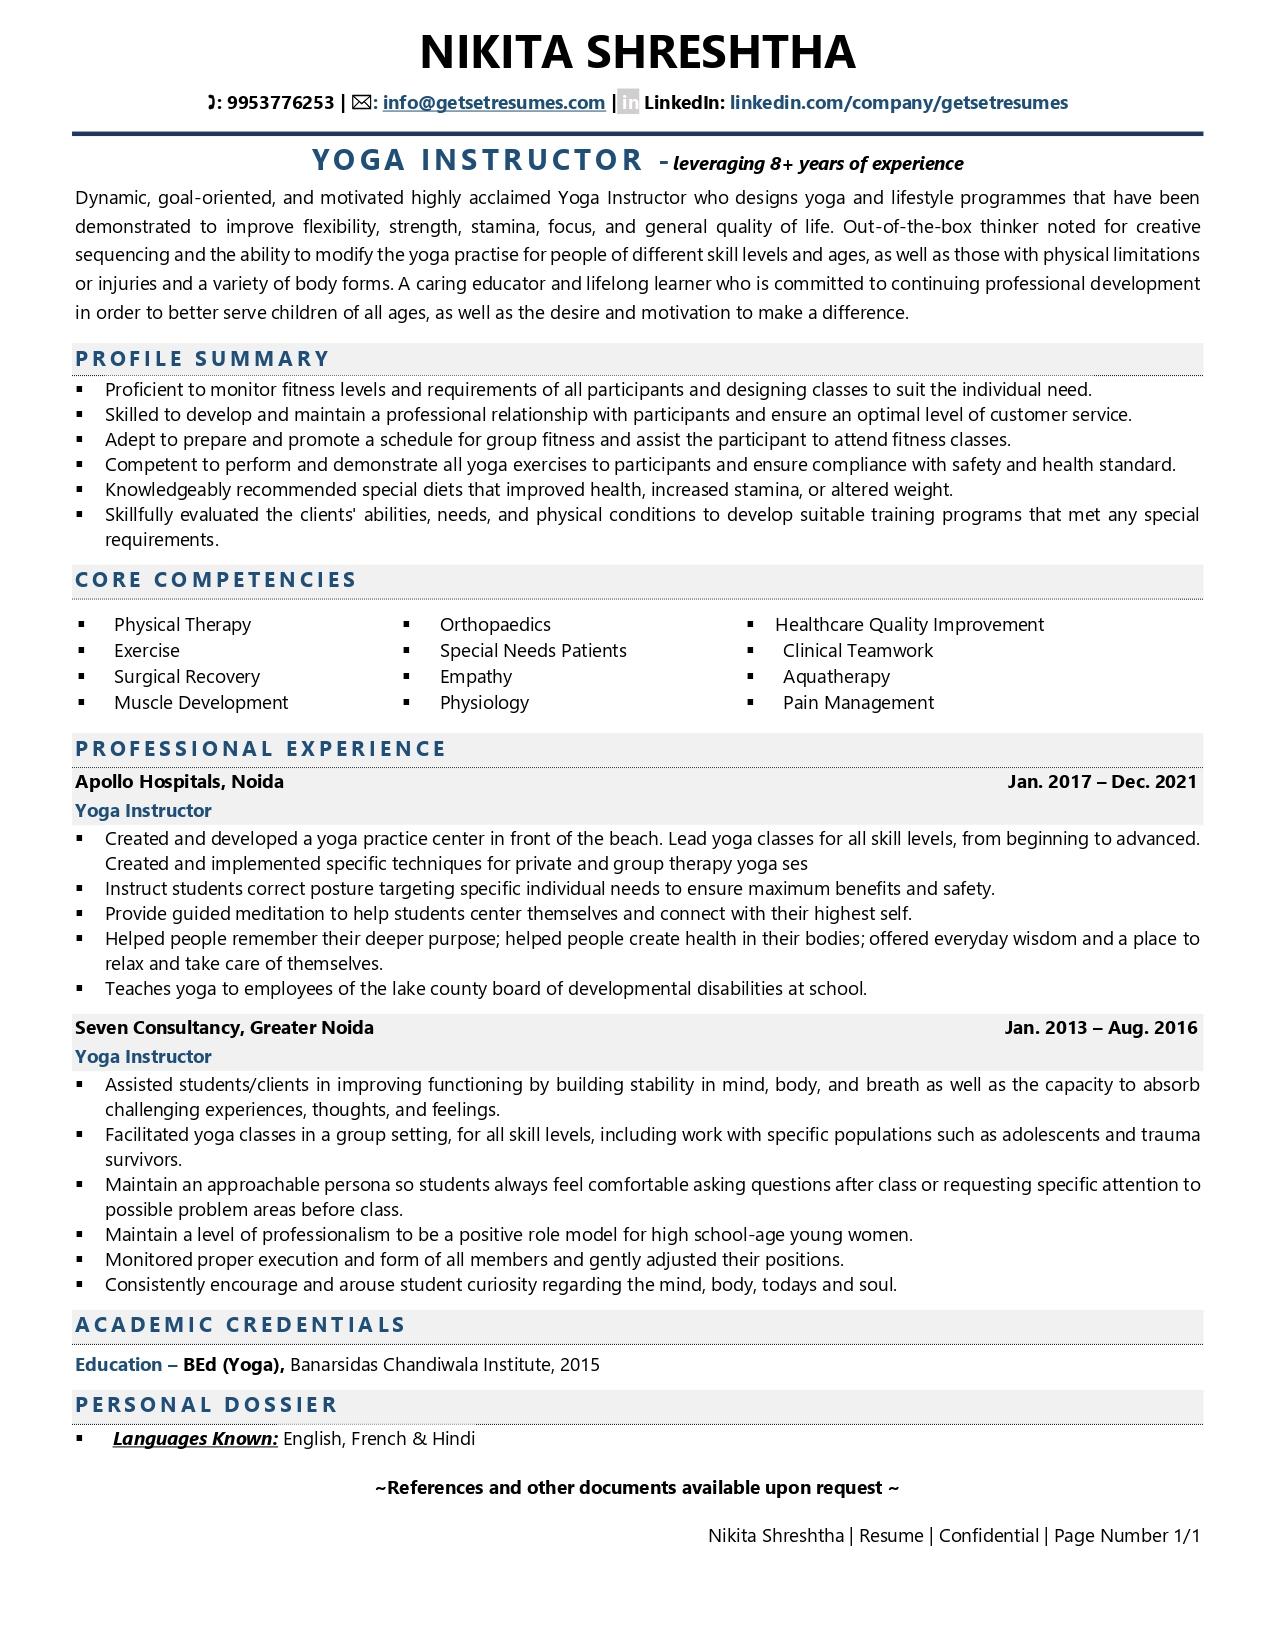 Yoga Instructor - Resume Example & Template